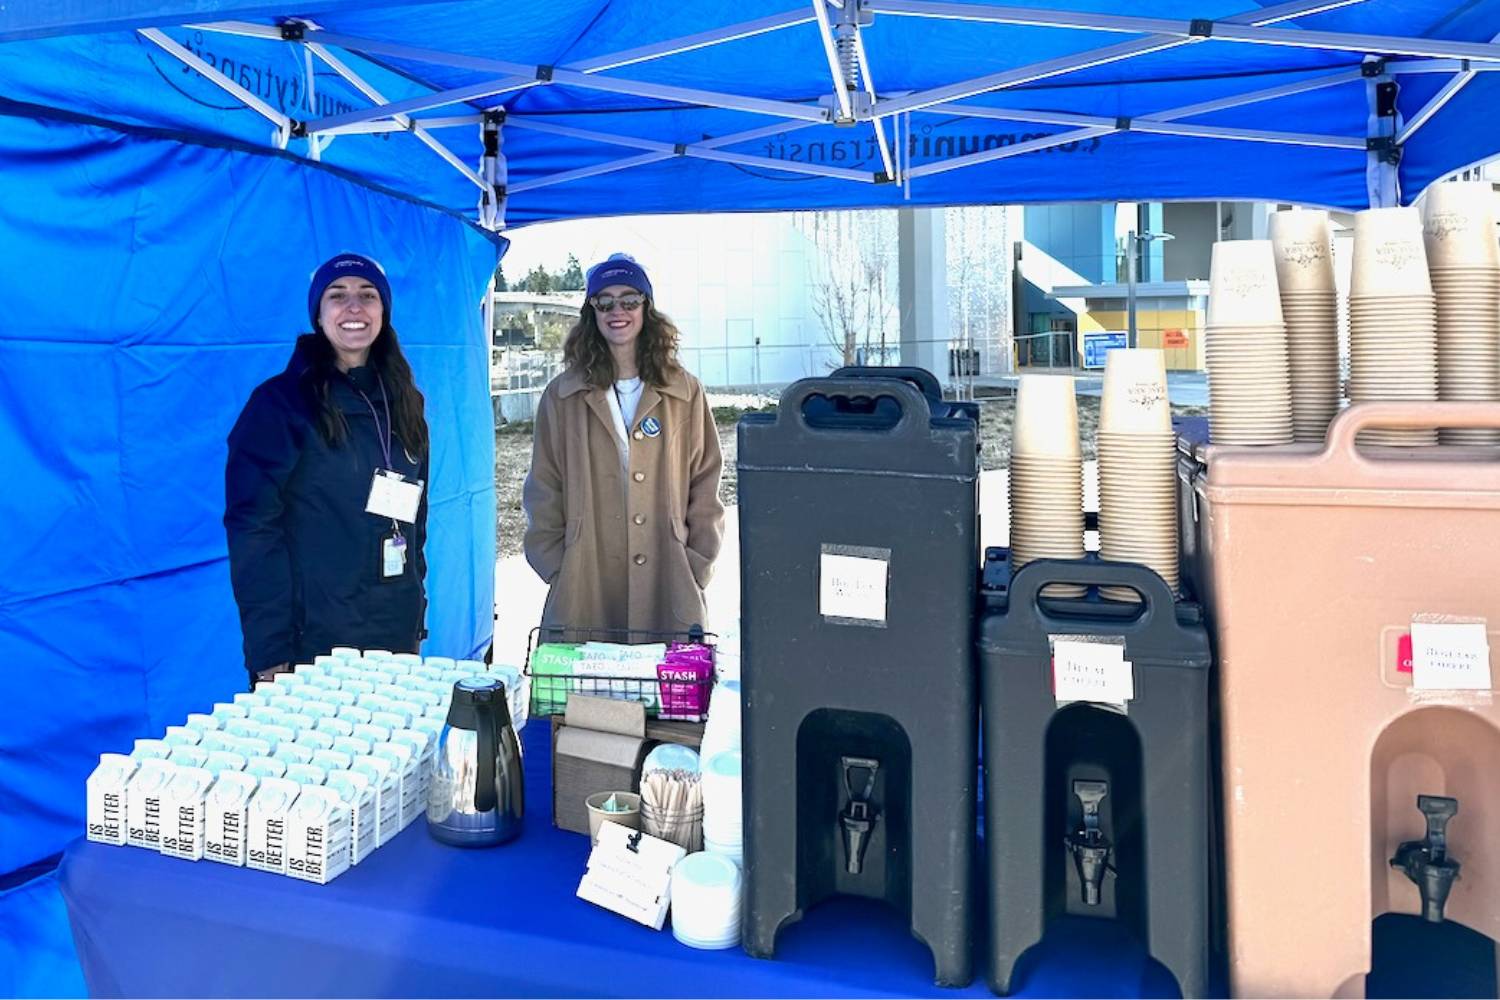 Two women smile beneath a canopy where coffee and water are served in compostable cups, lids and cartons.